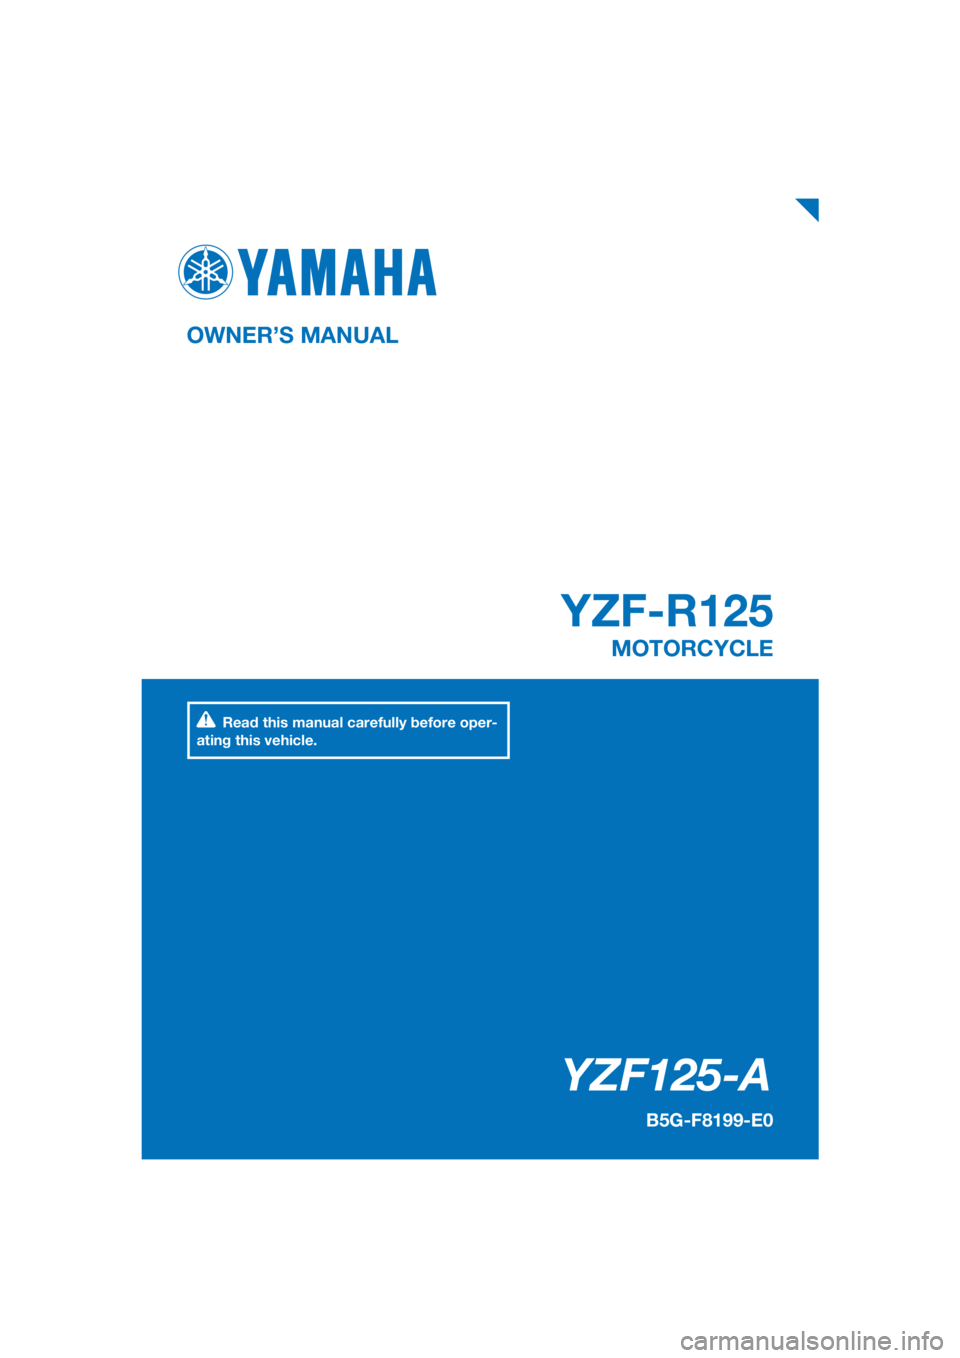 YAMAHA YZF-R125 2019  Owners Manual PANTONE285C
YZF125-A
YZF-R125
OWNER’S MANUAL
B5G-F8199-E0
MOTORCYCLE
[English  (E)]
Read this manual carefully before oper-
ating this vehicle. 